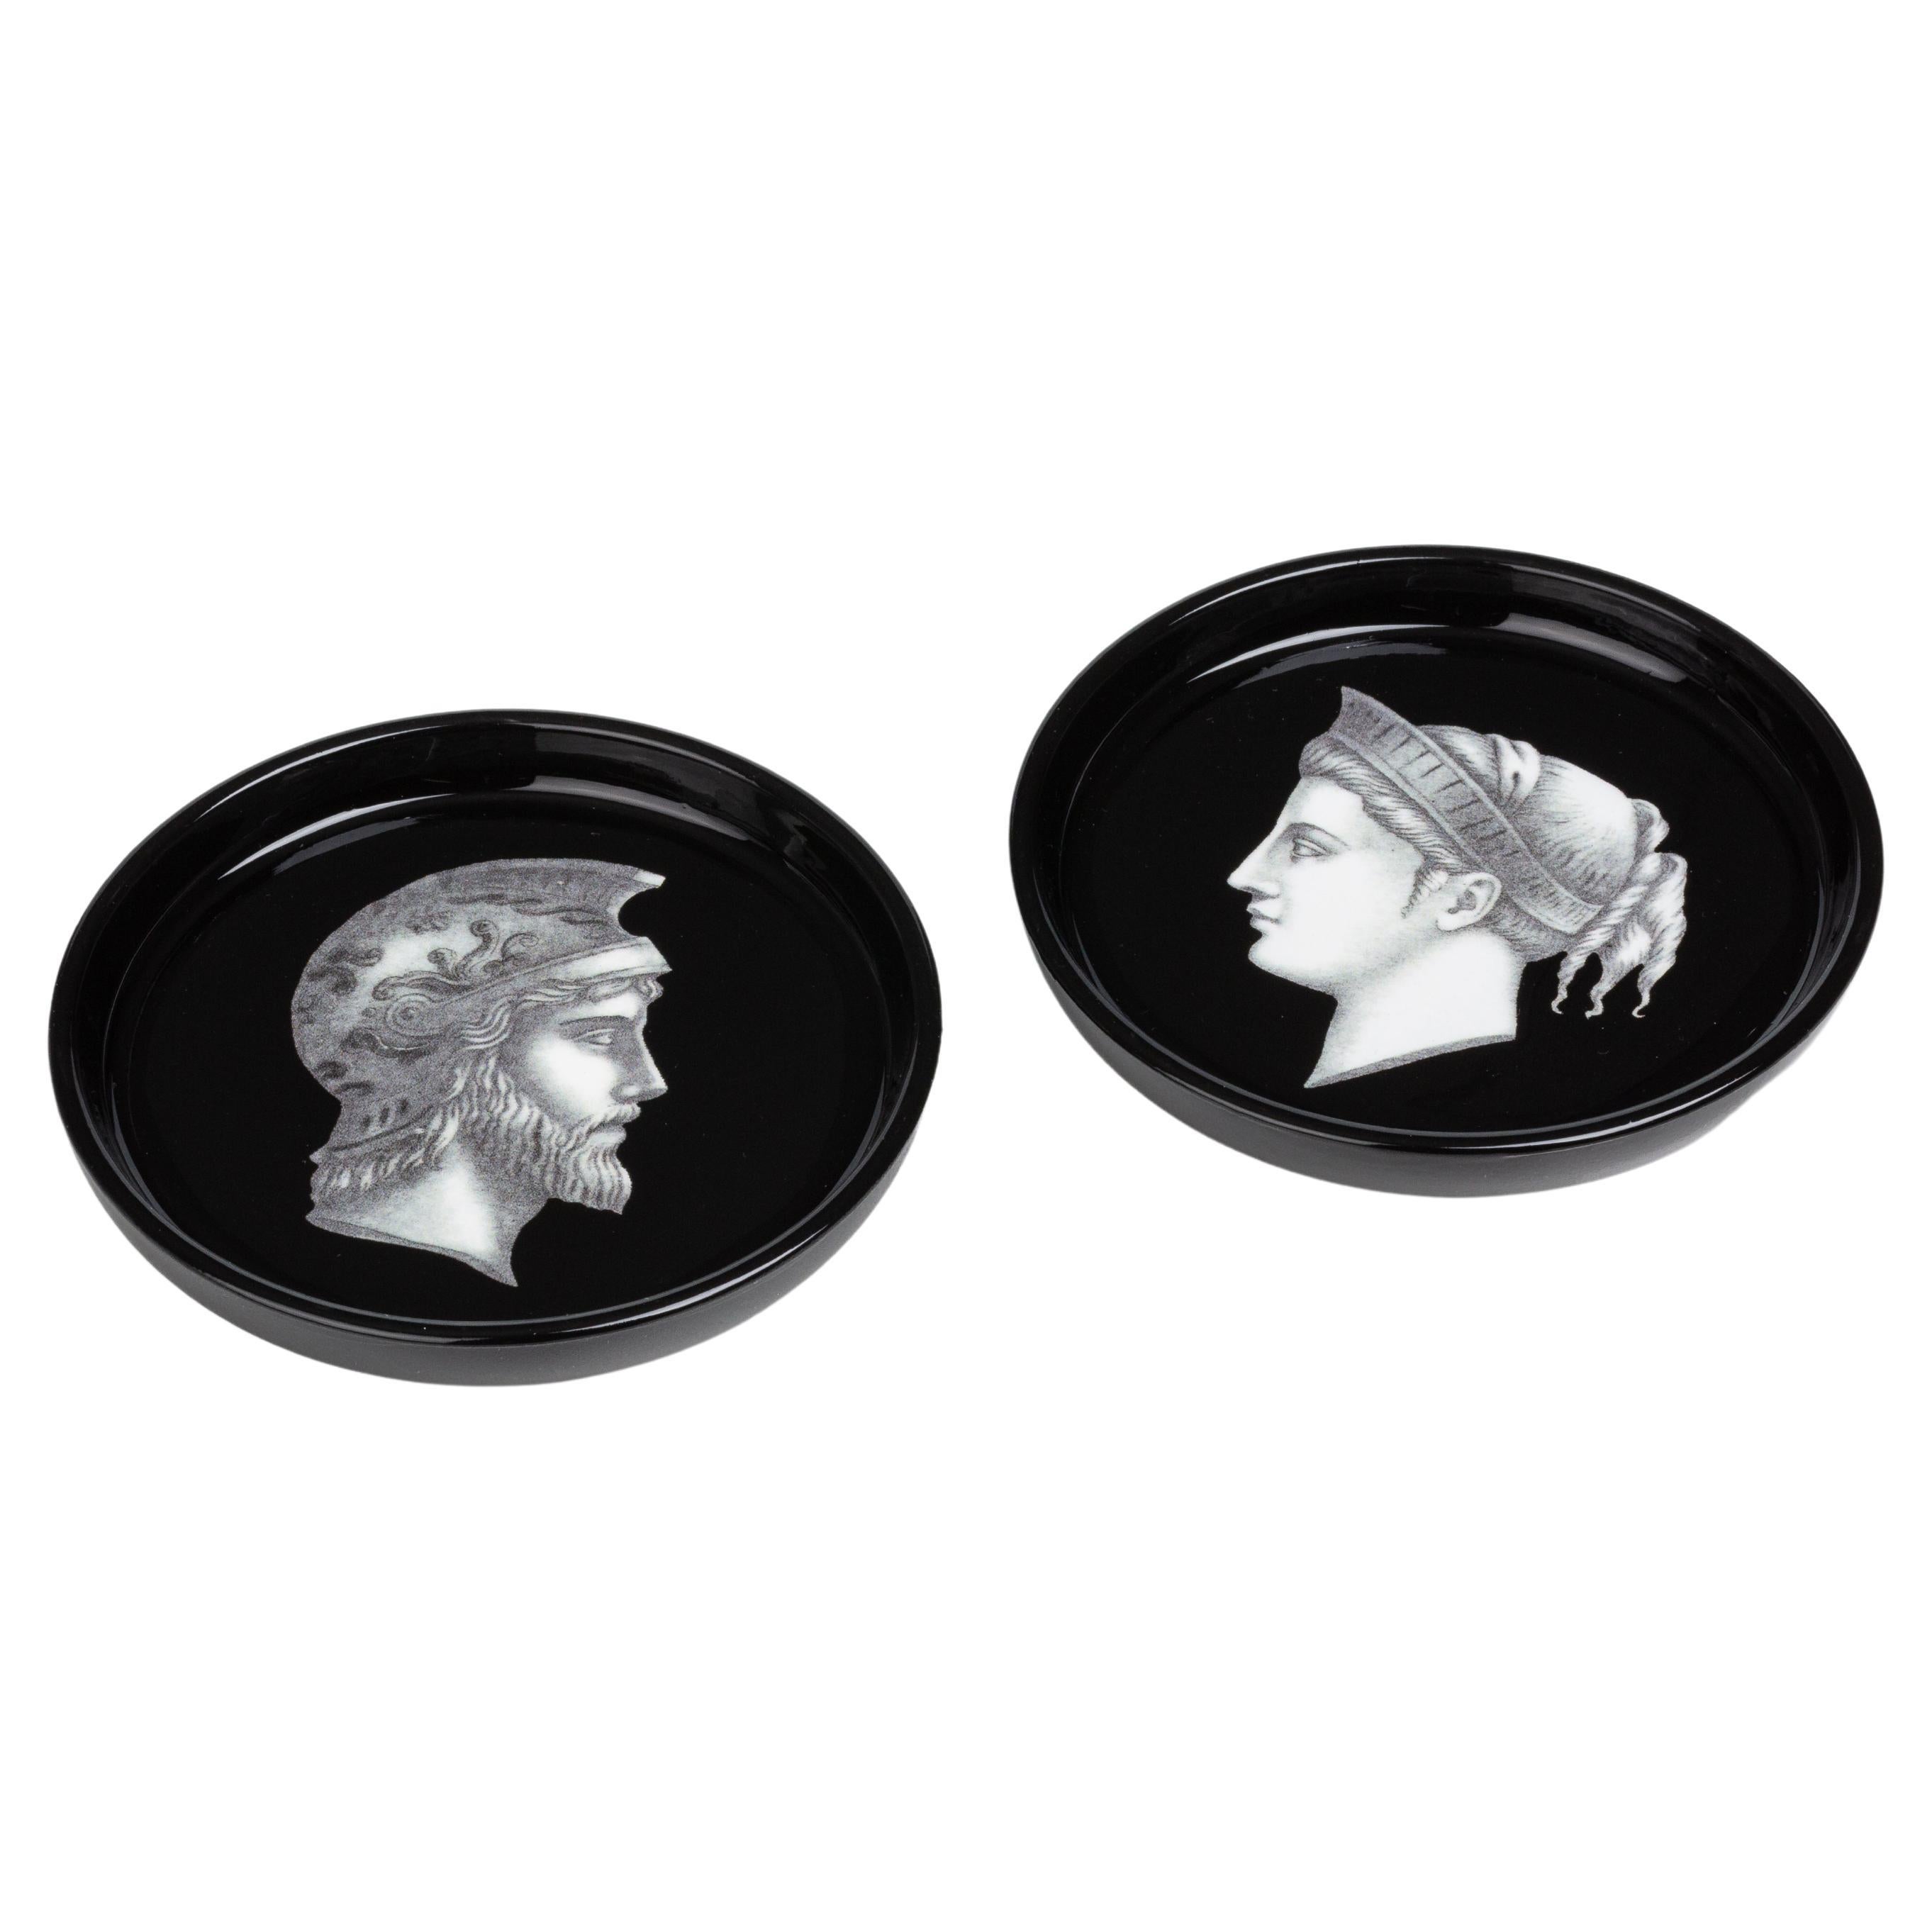 Italian Contemporary Black and White Ancient Profile Resin Coasters Set of 2